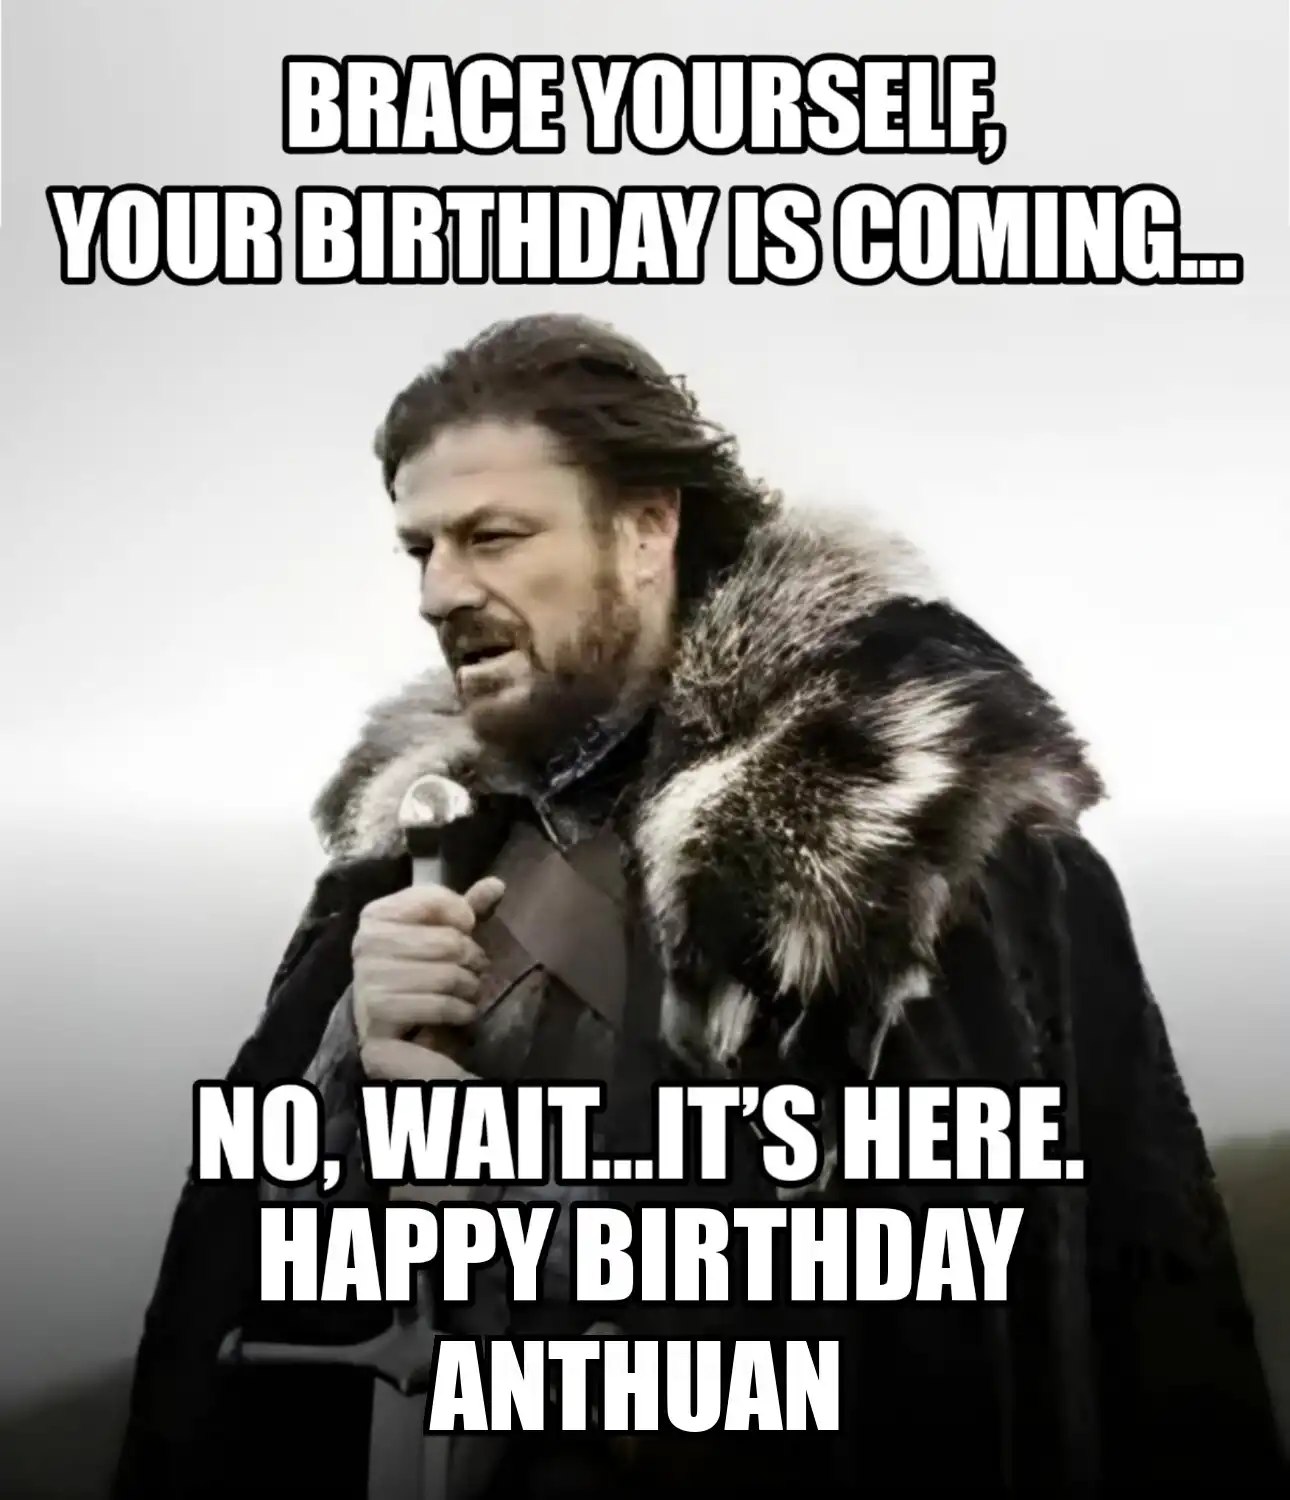 Happy Birthday Anthuan Brace Yourself Your Birthday Is Coming Meme